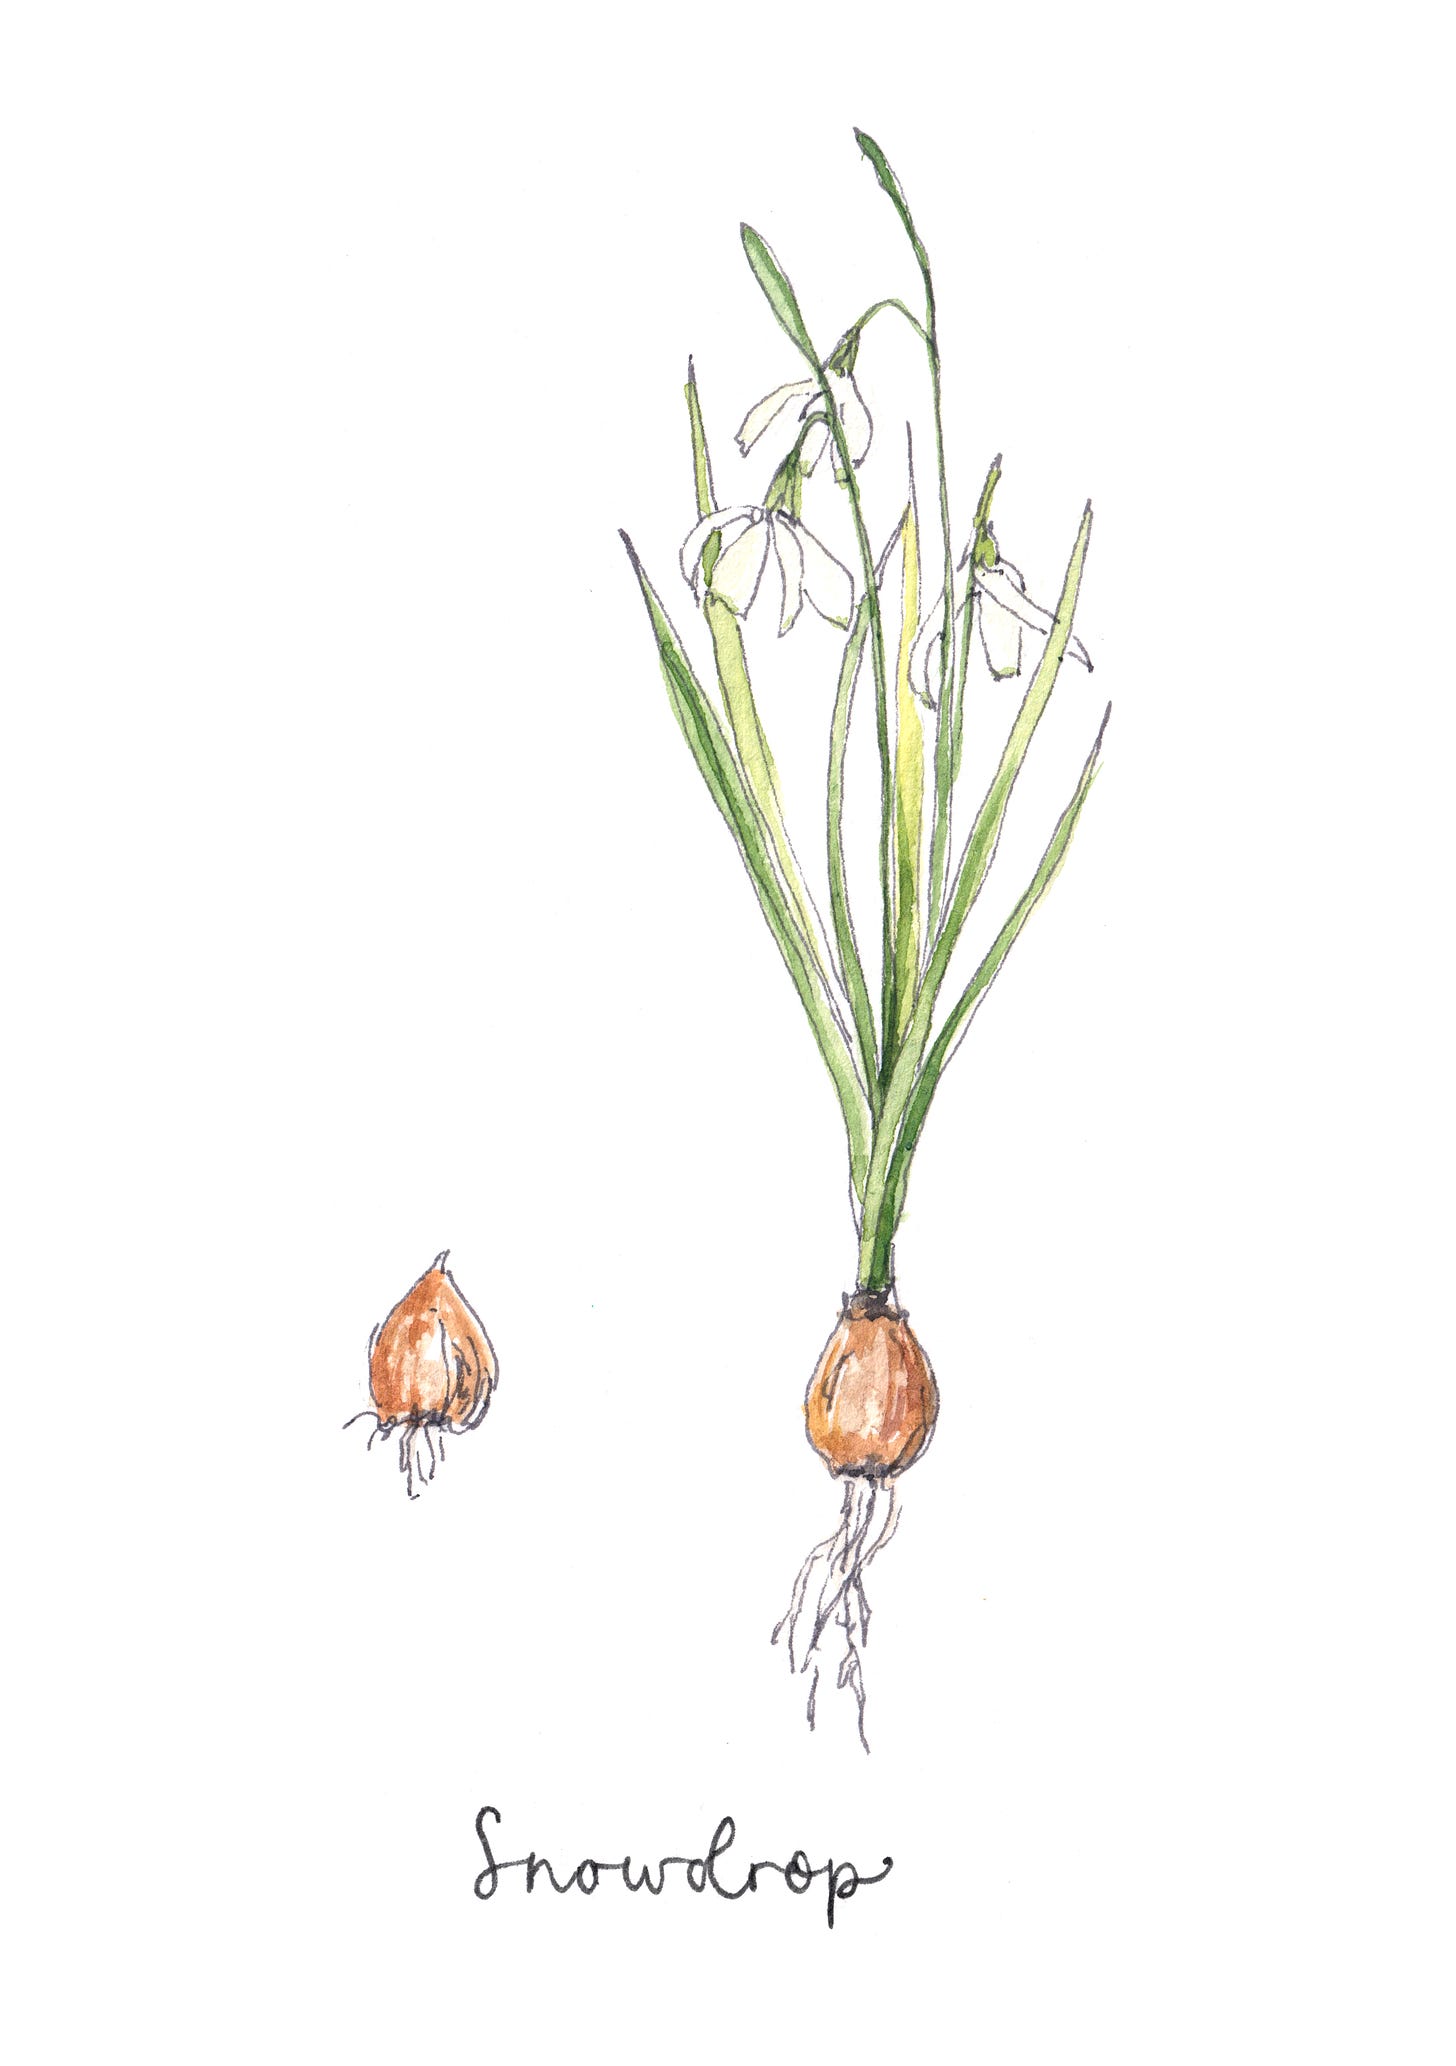 Botanical watercolour drawing of a snowdrop